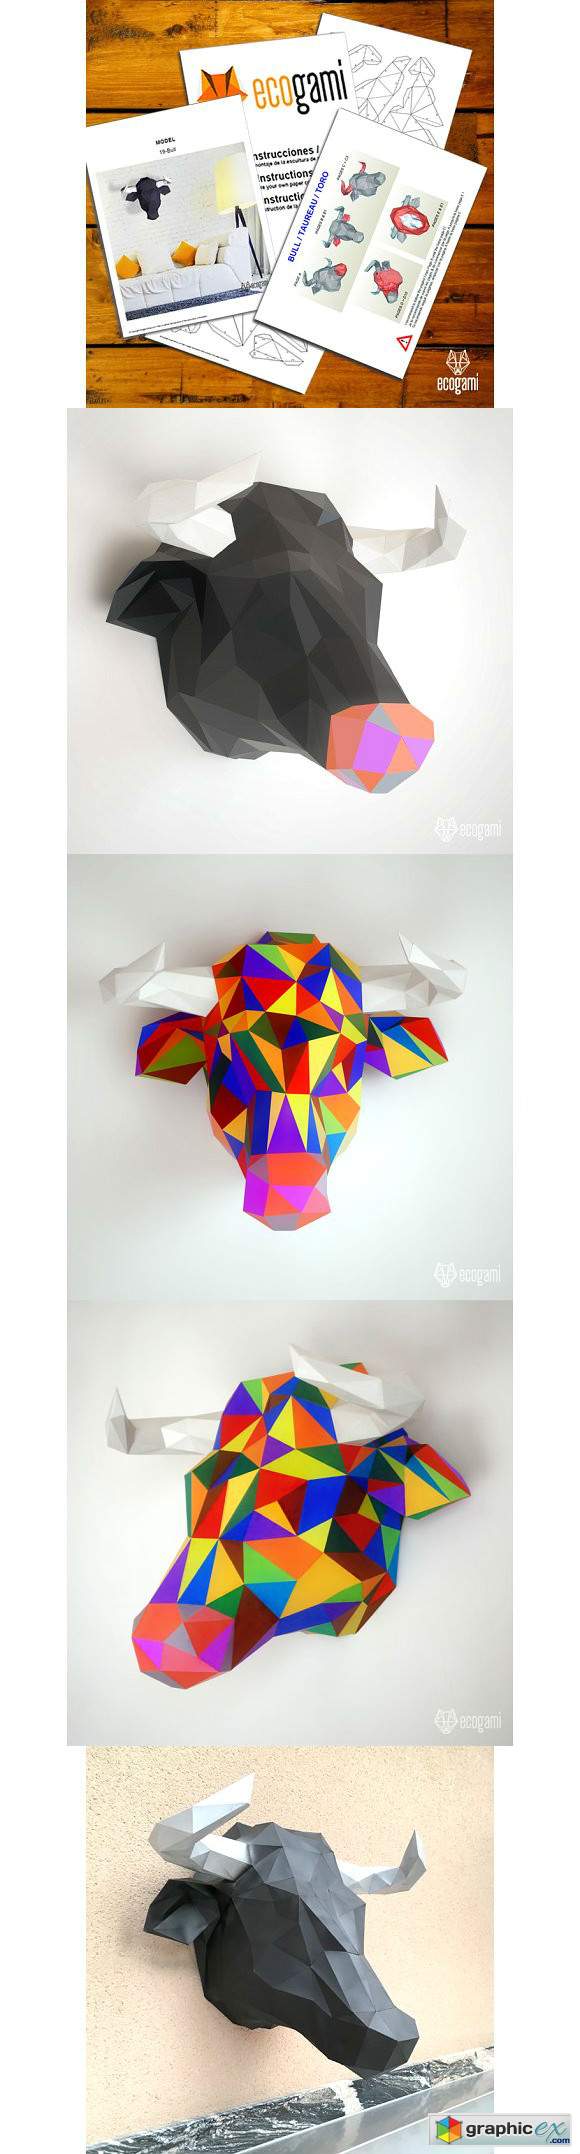 DIY papercraft project Bull trophy